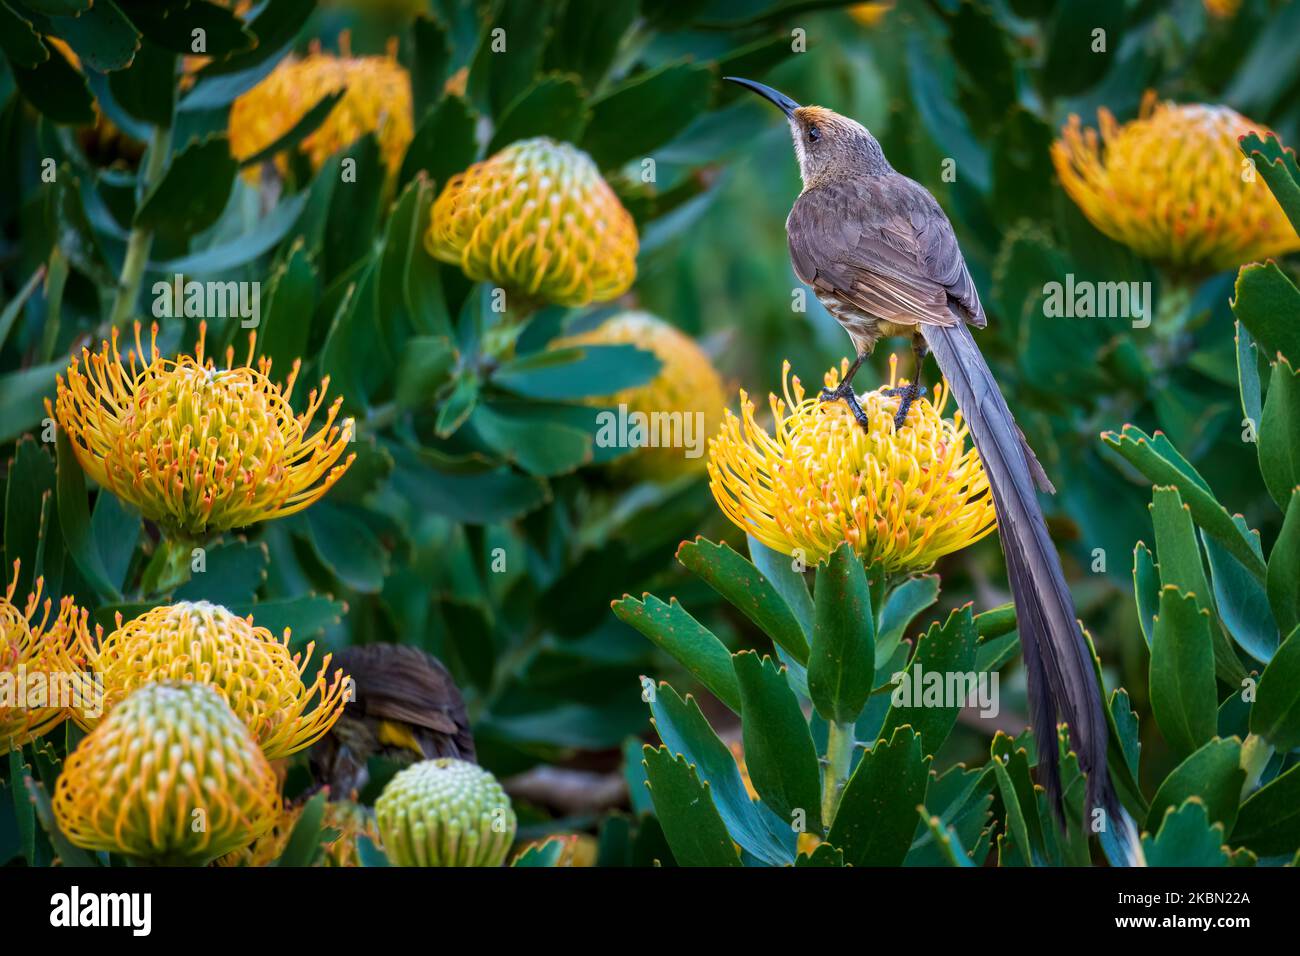 Cape sugarbird (Promerops cafer) on a  Pincushion protea floweer. Hermanus, Whale Coast, Overberg, Western Cape, South Africa. Stock Photo